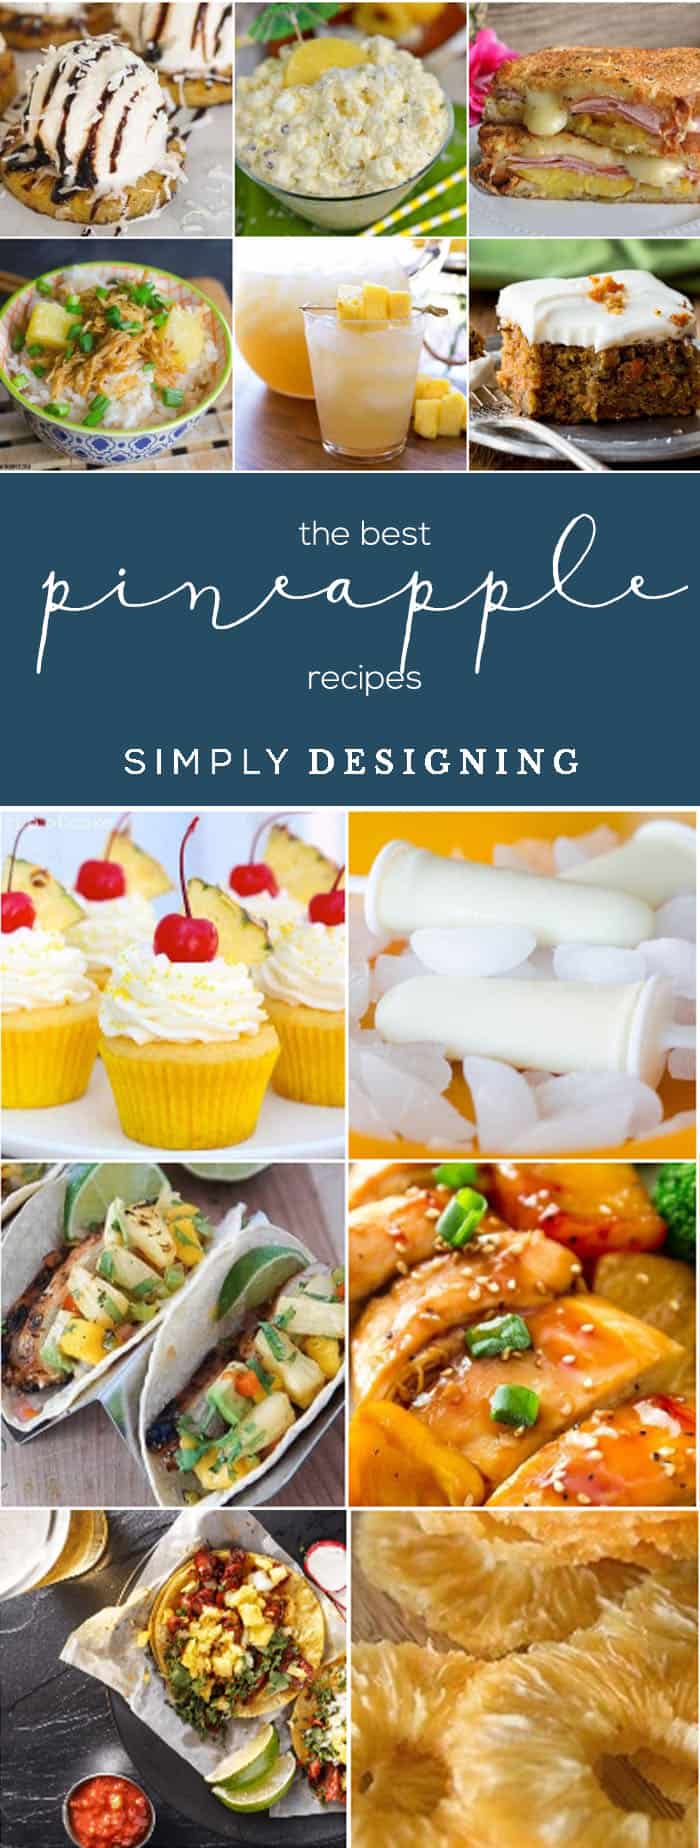 the best pineapple recipes pin 25+ Pineapple Recipes for the Perfect Summer Treat 23 back to school